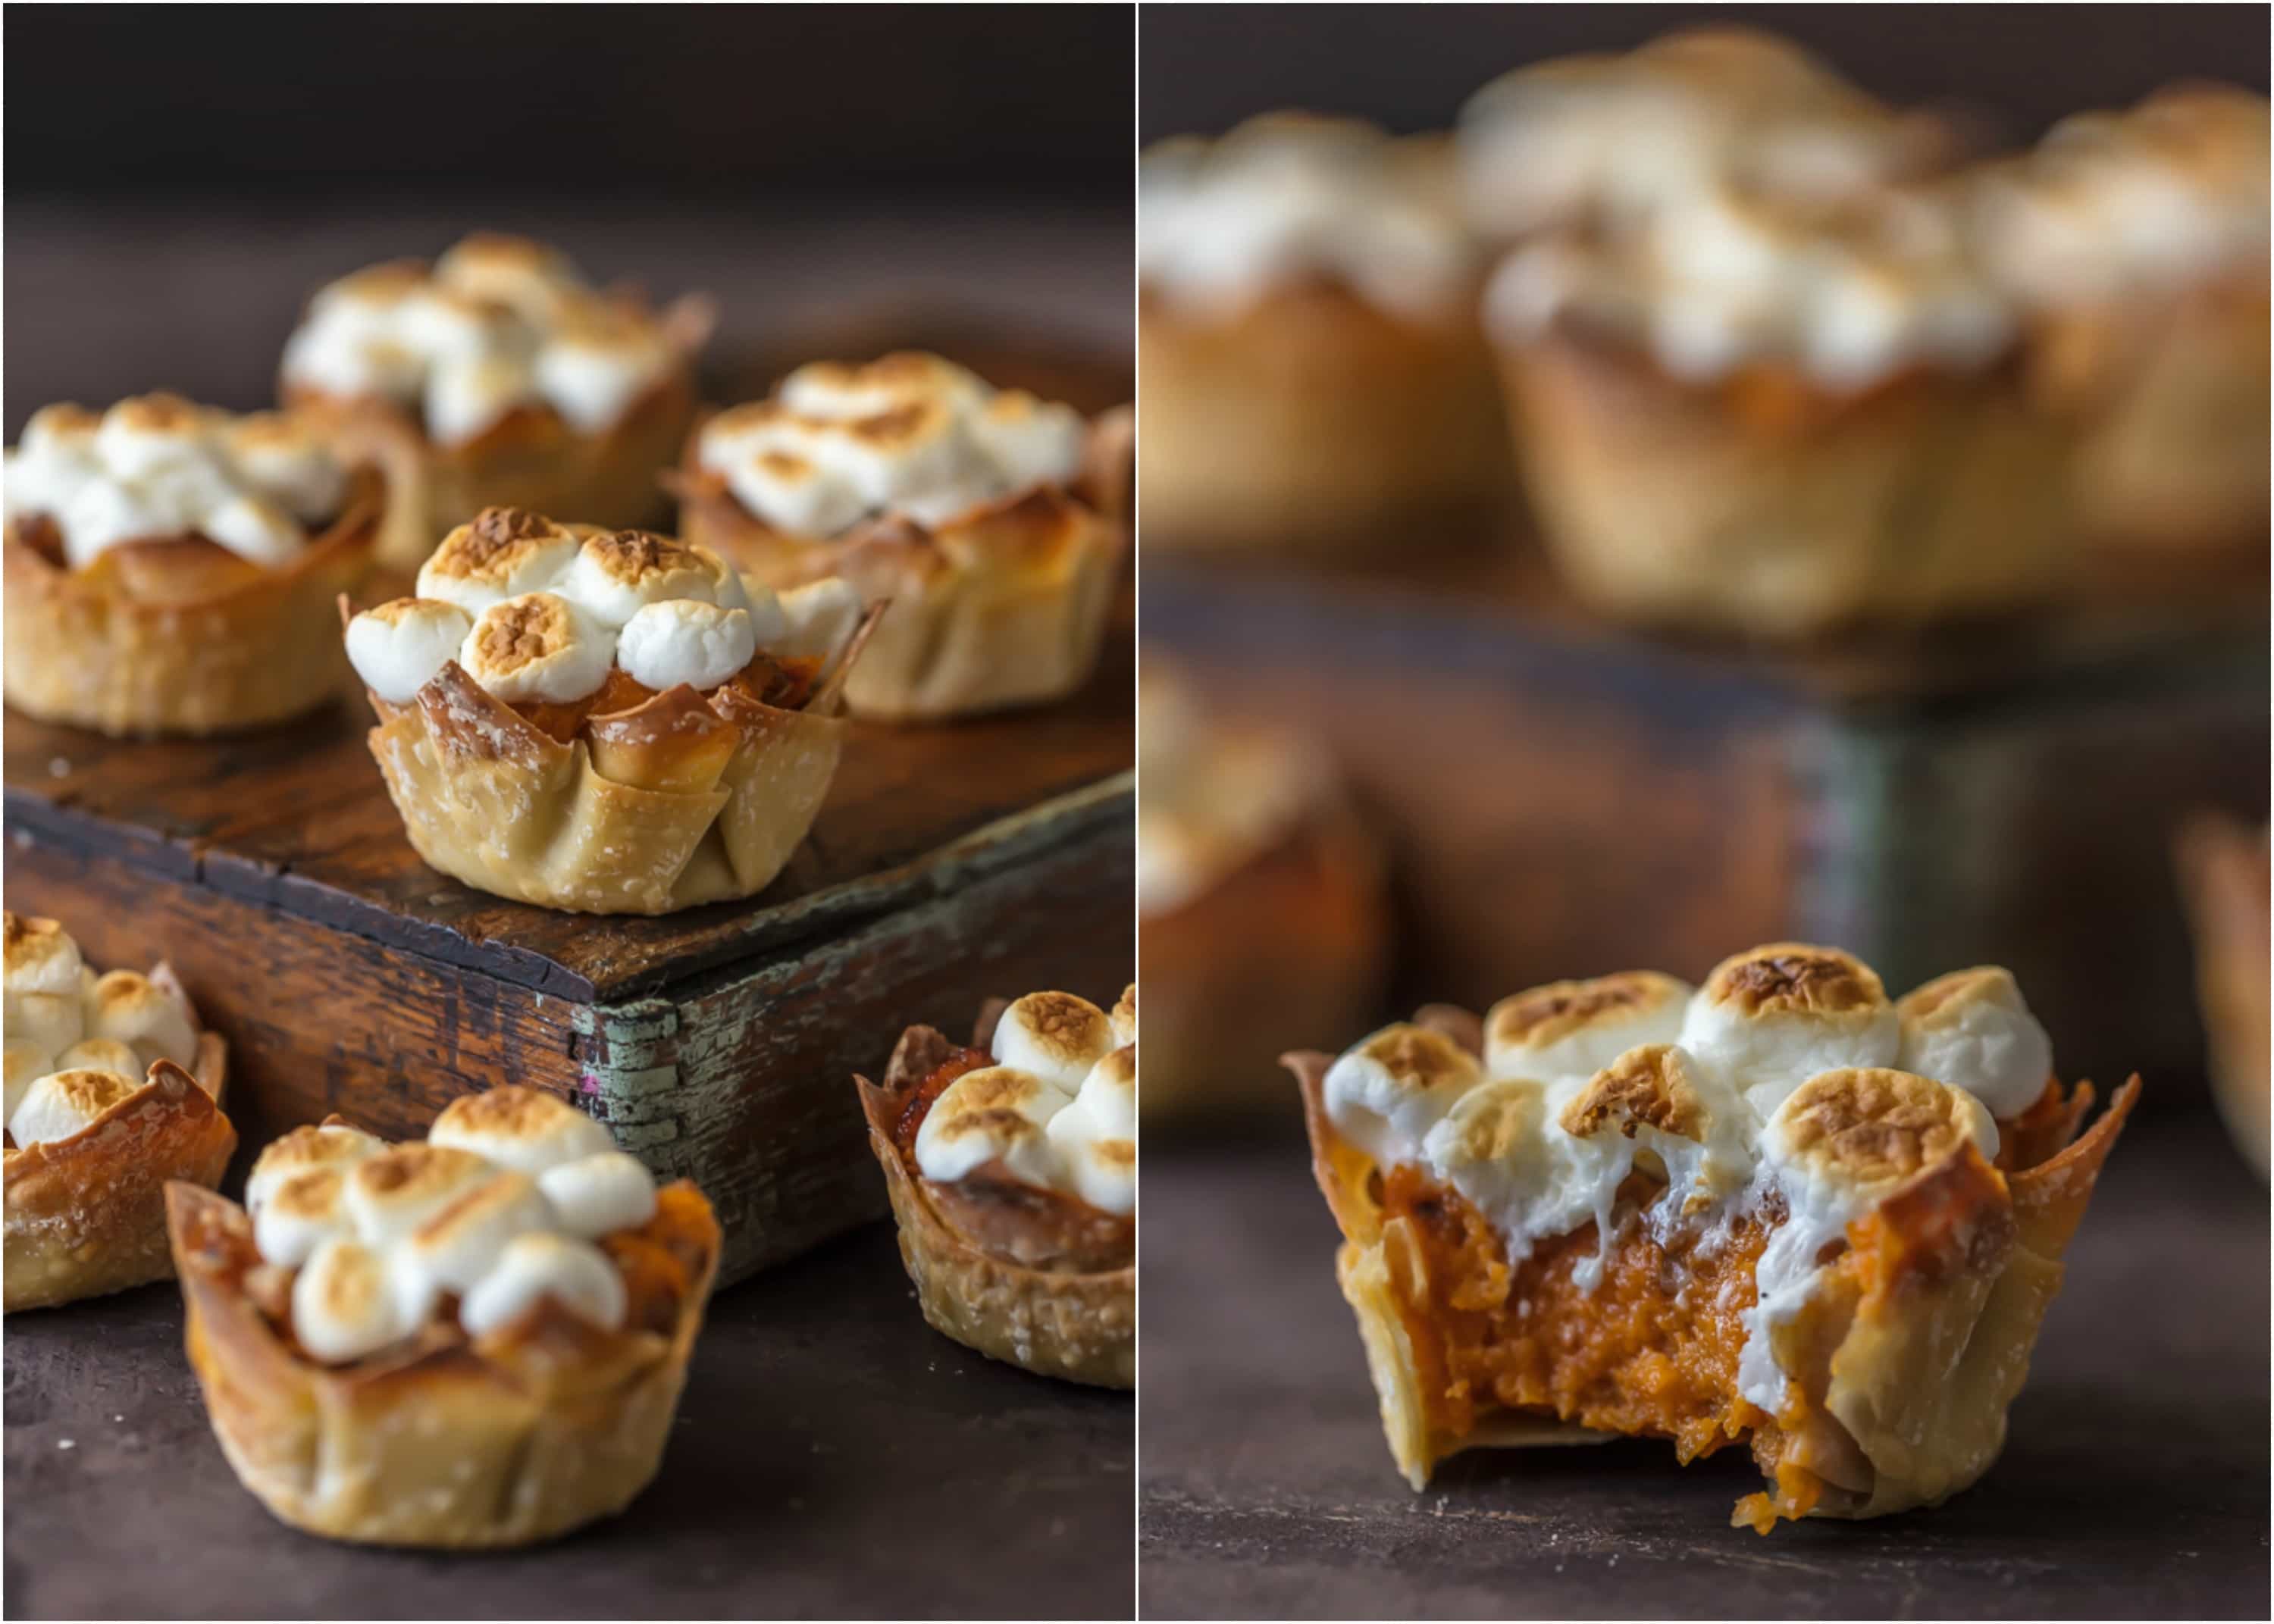 Wow your Thanksgiving guests with MINI SWEET POTATO SOUFFLE CUPS! It doesn't get cuter than wonton cups stuffed with sweet potato souffle and topped with toasted marshmallows.